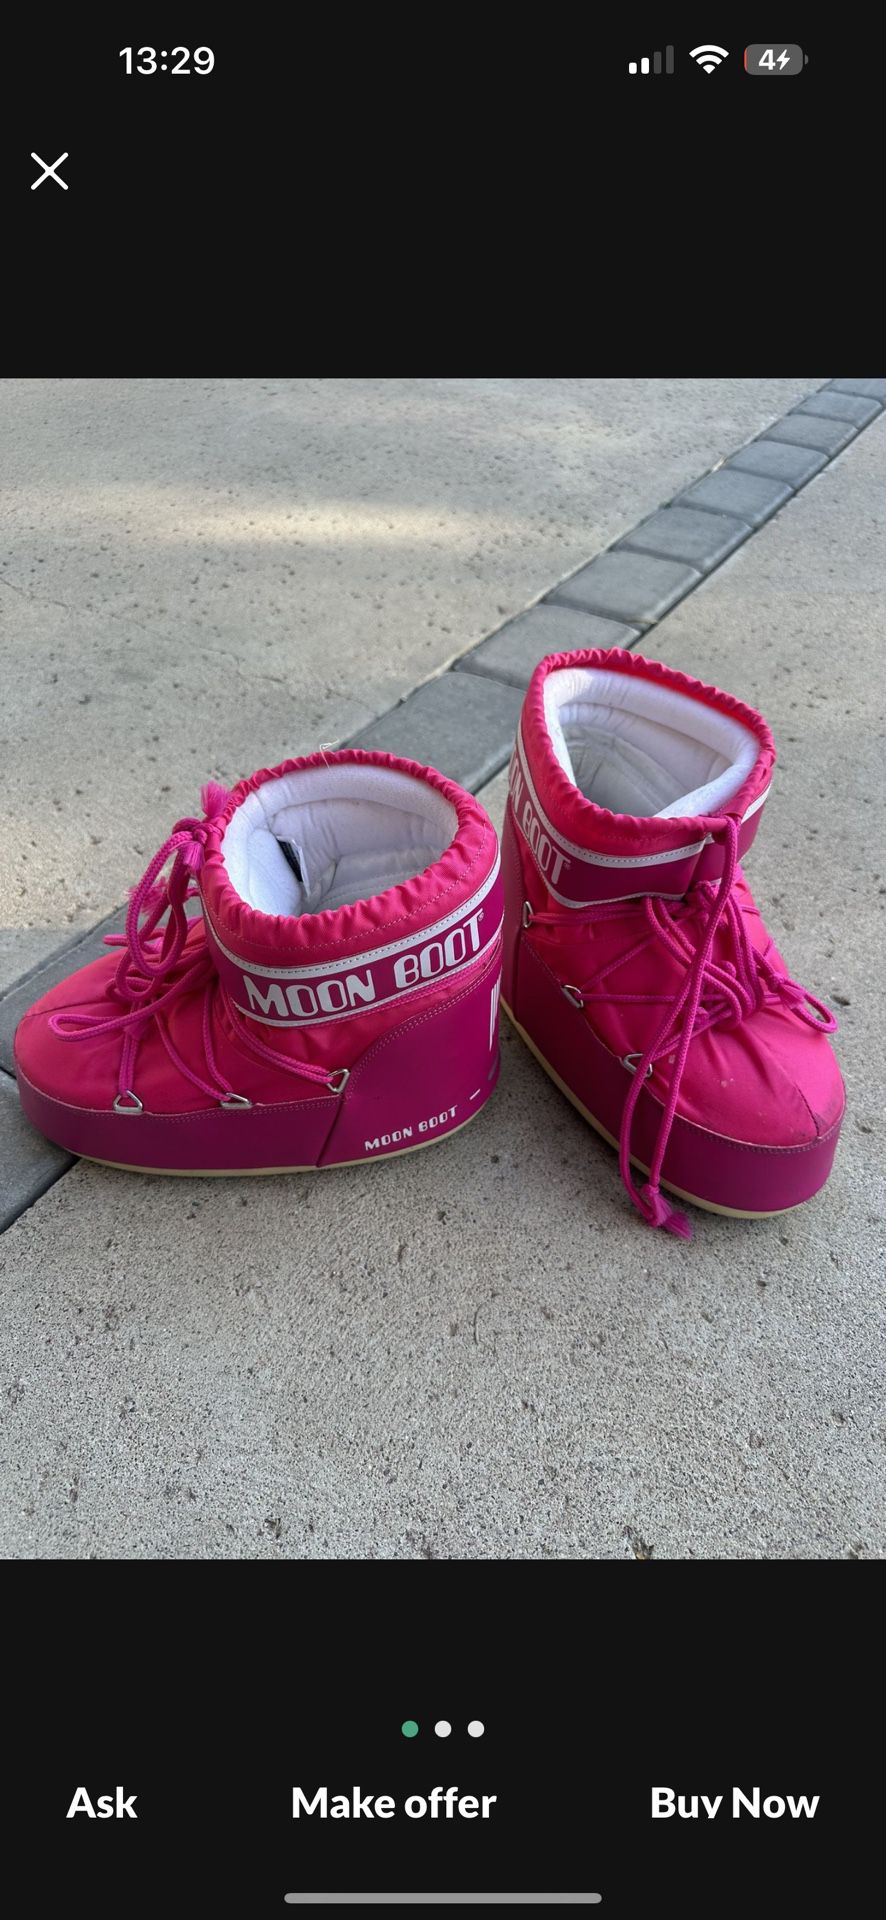 Moon Boots Hot Pink Low 8-9